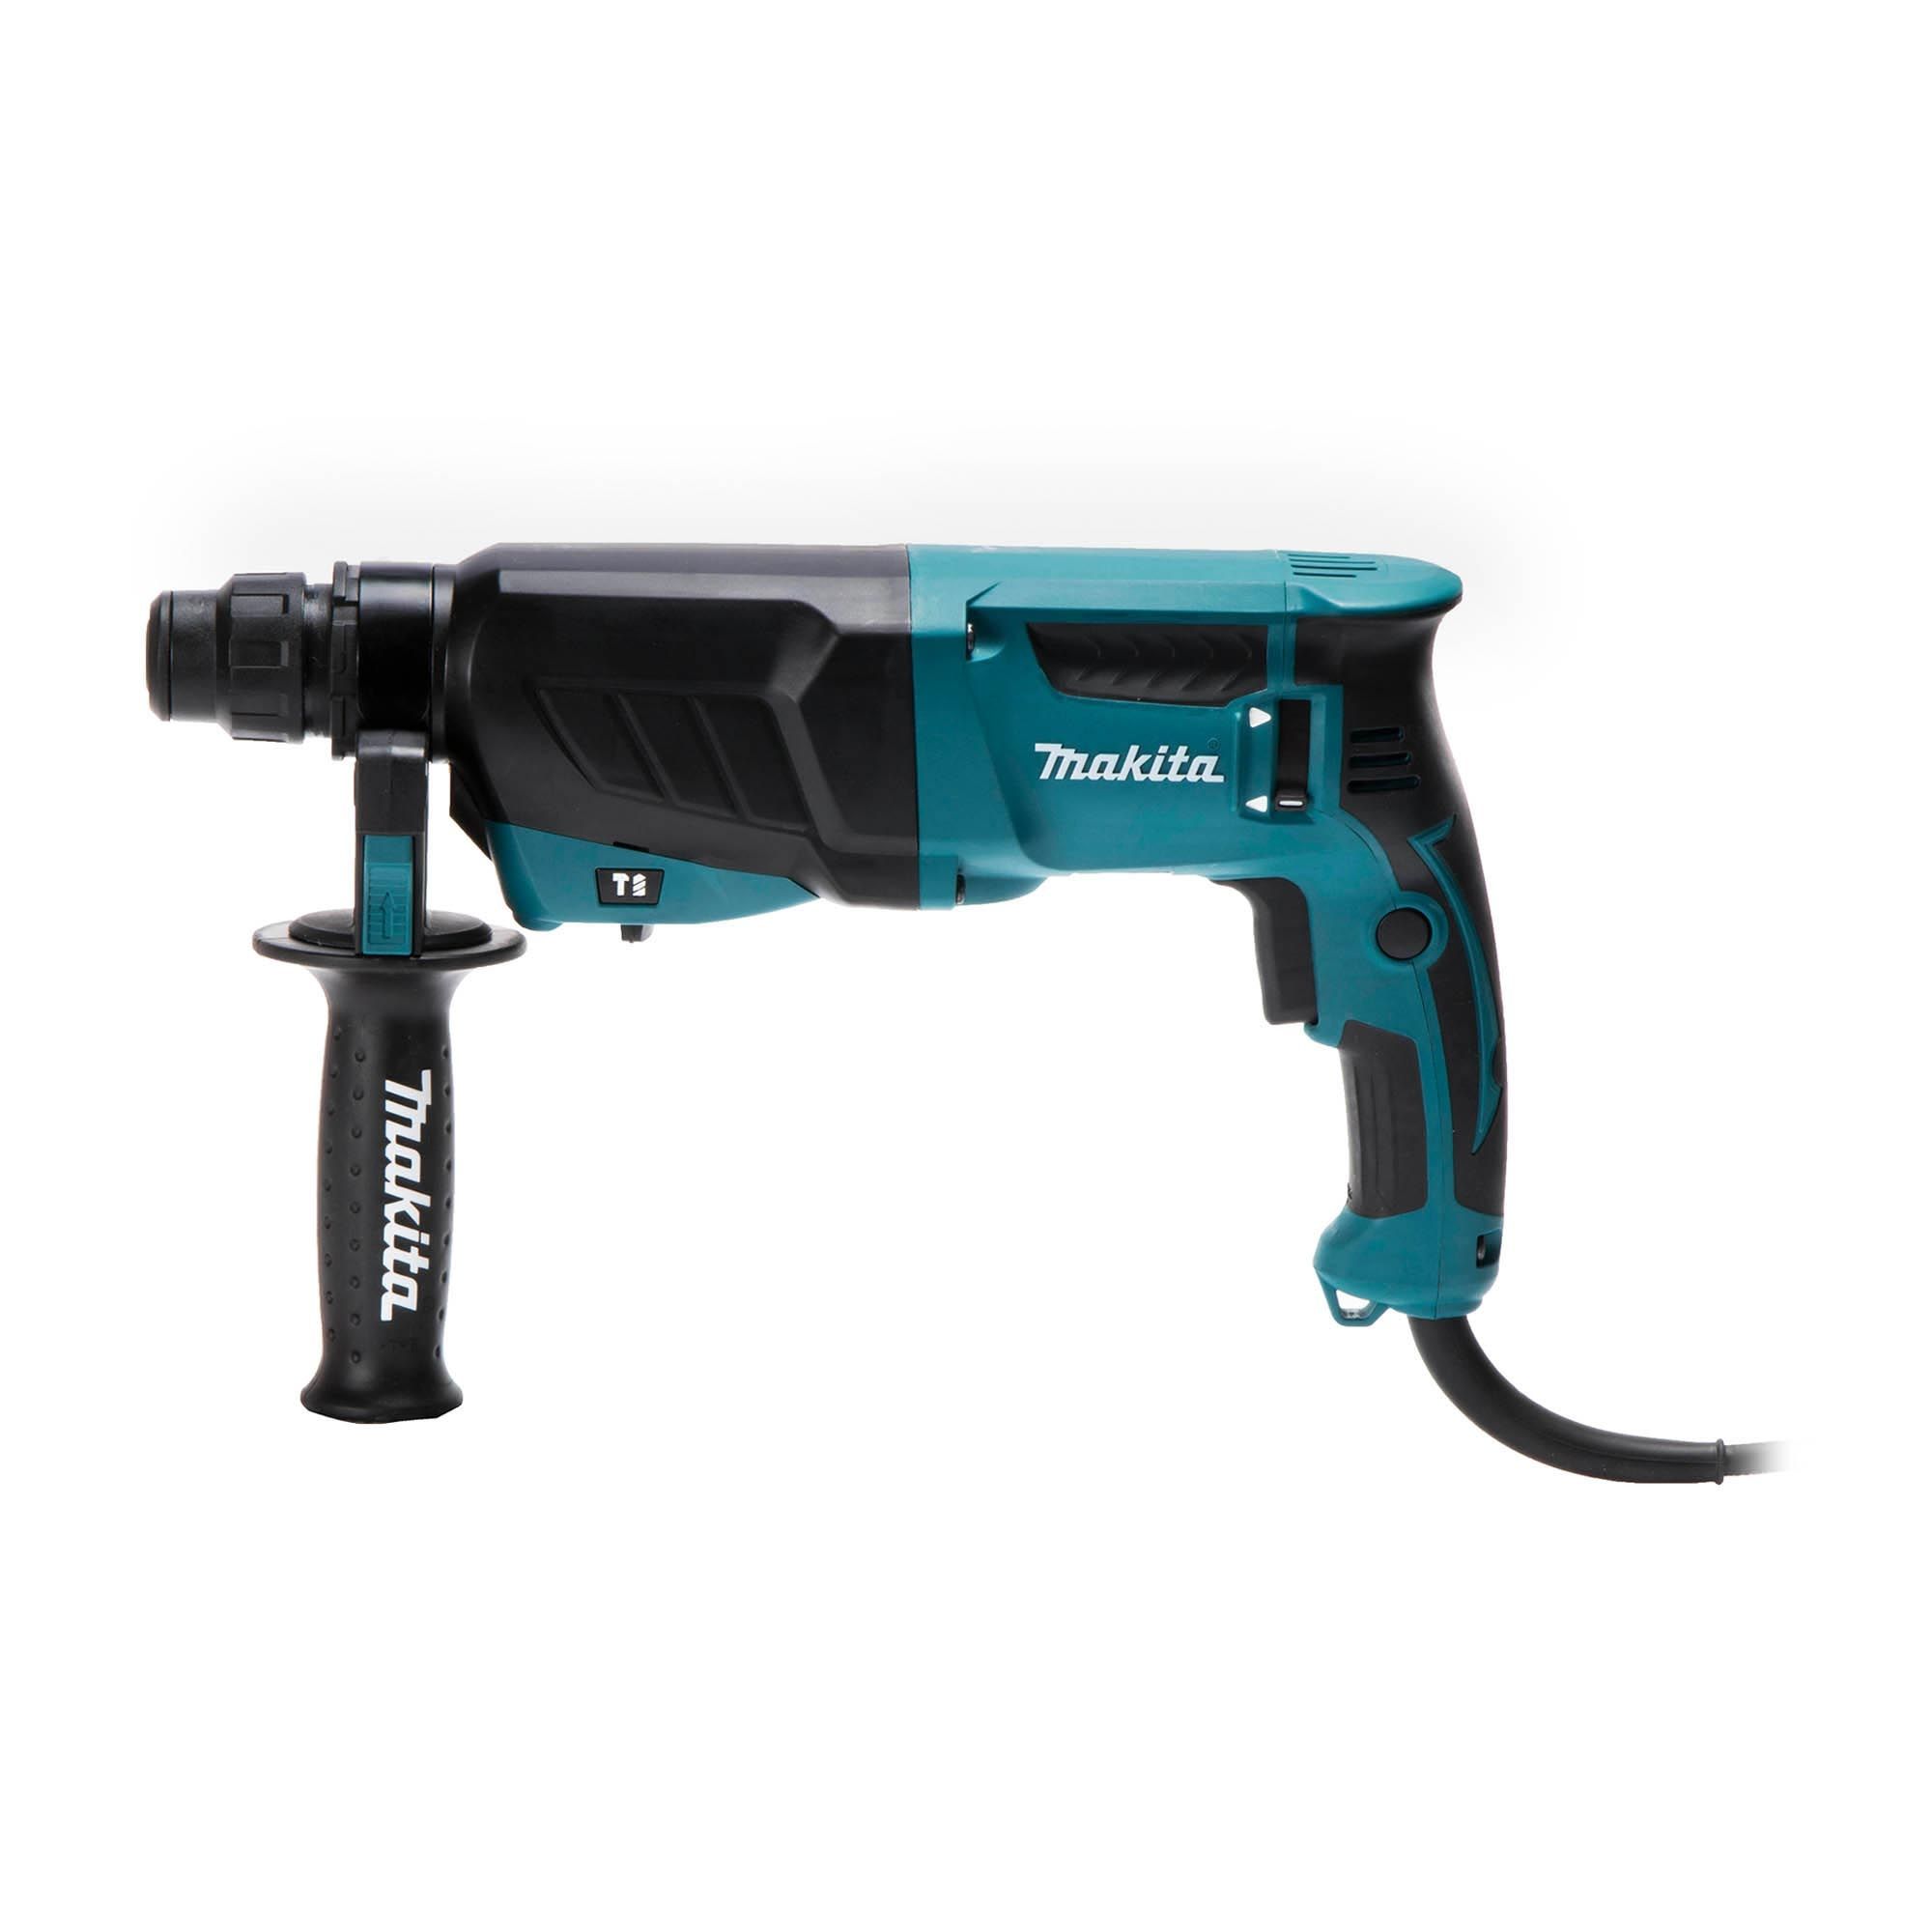 Makita HR2630 3 Mode SDS Rotary Hammer Drill 110V Replaces HR2610 